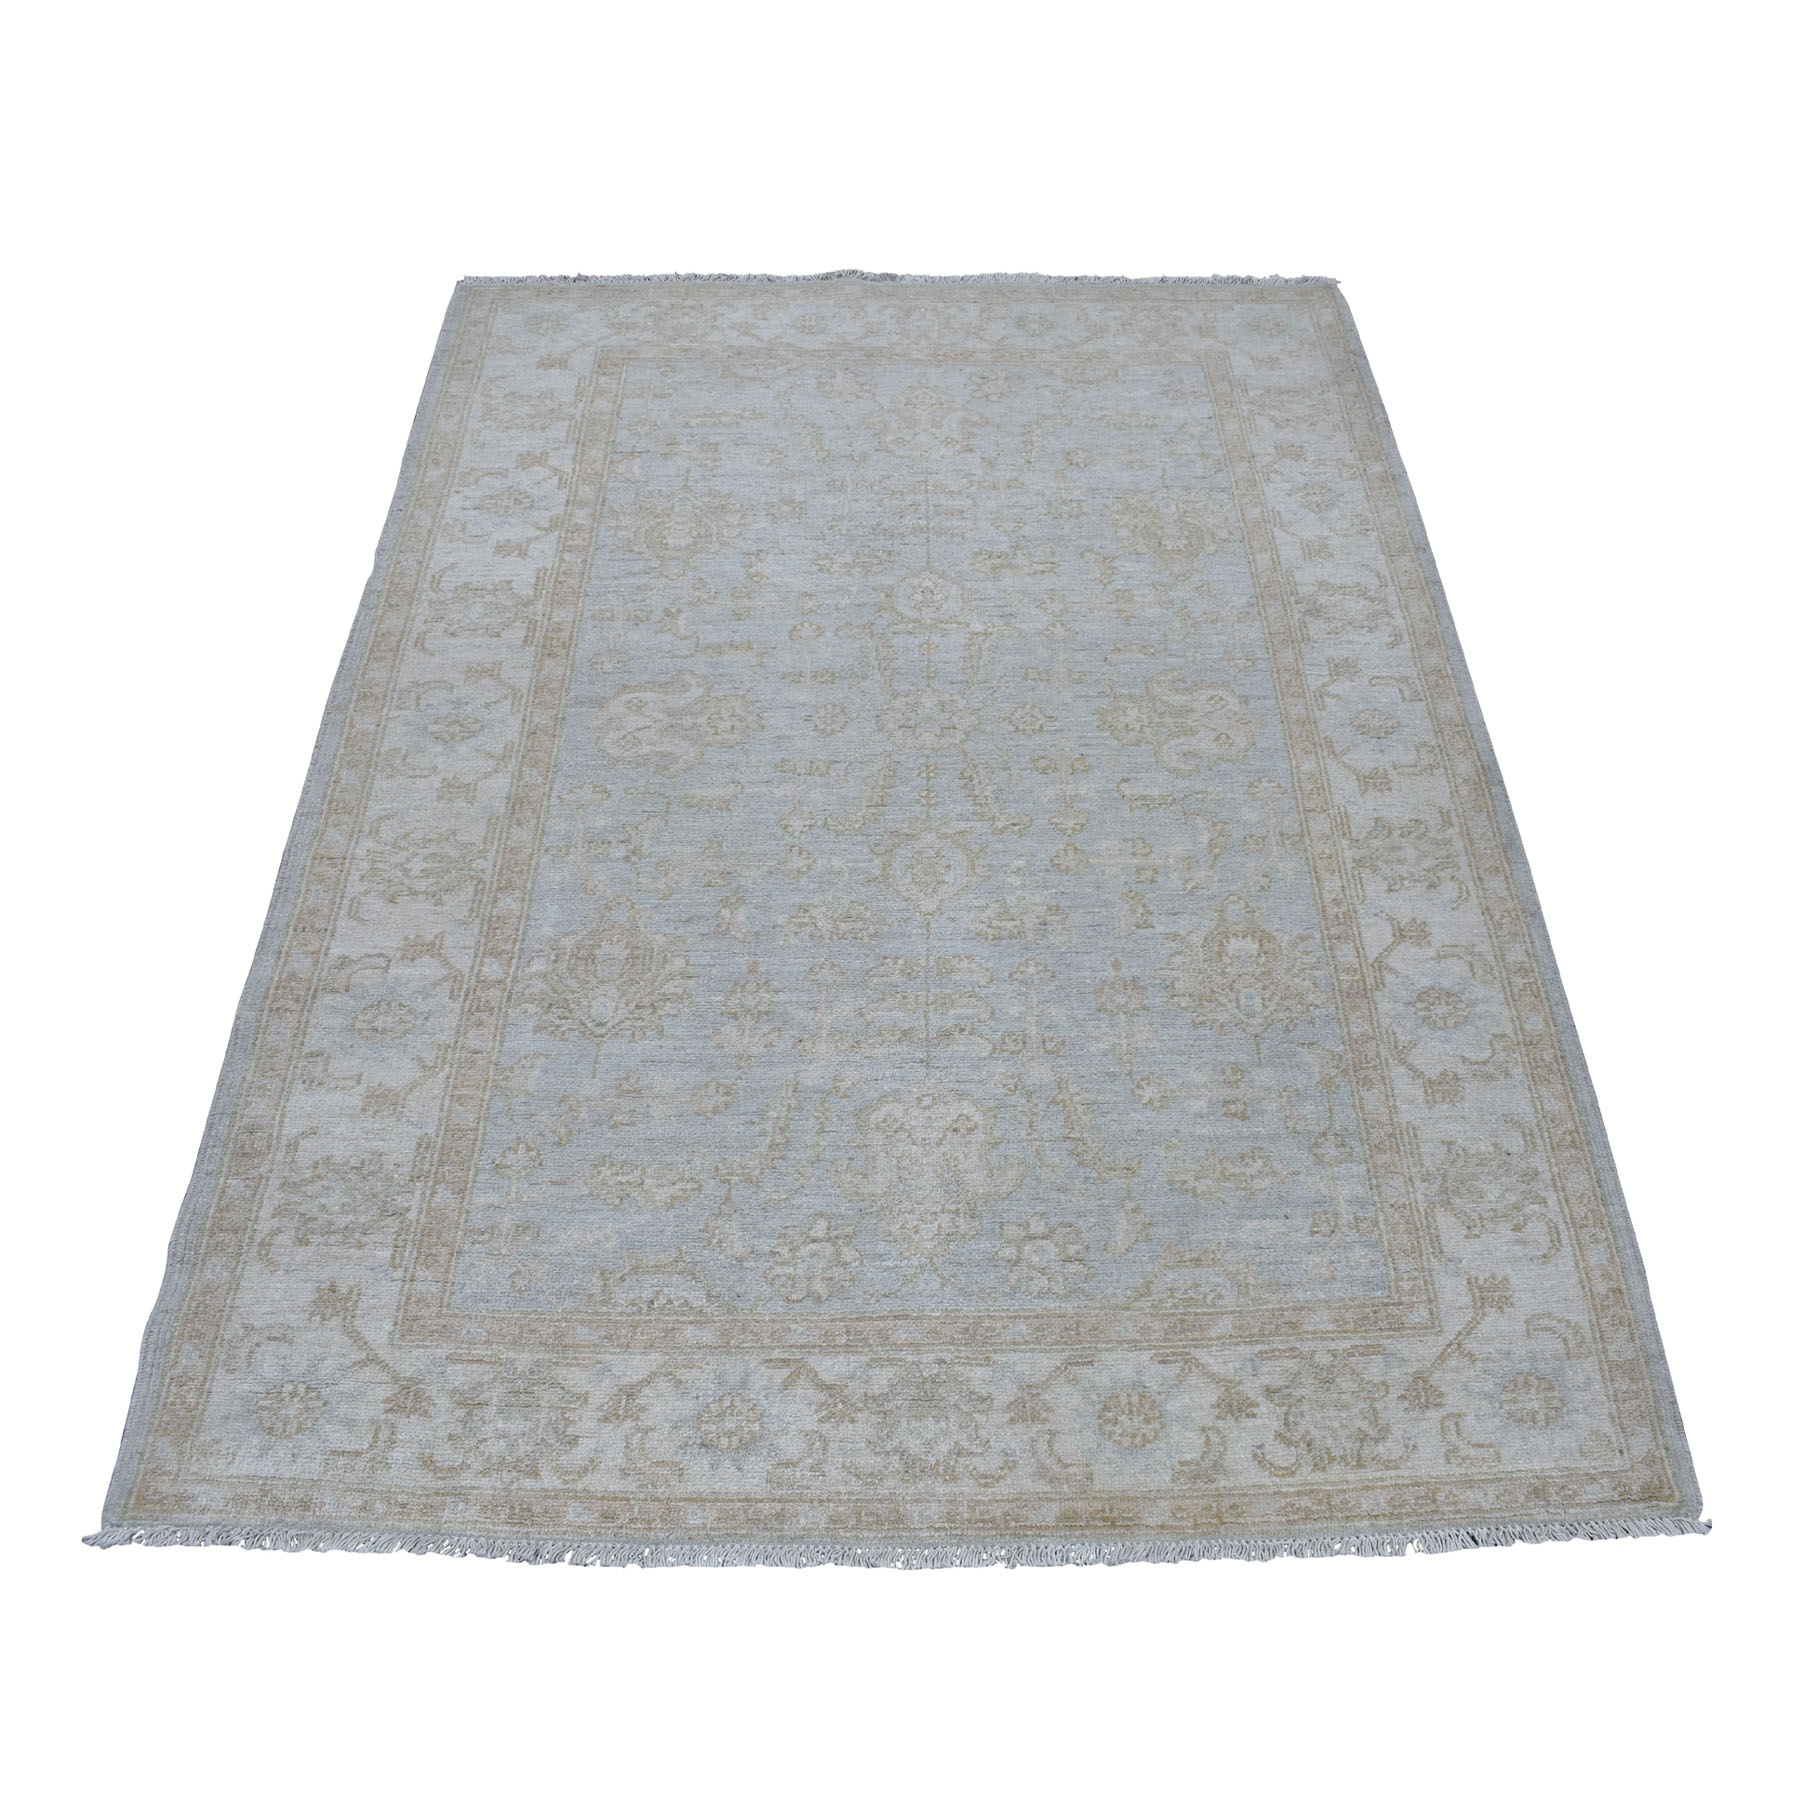 4-2 x6- White Wash Peshawar Mahal Design Pure Wool Hand Knotted Oriental Rug 